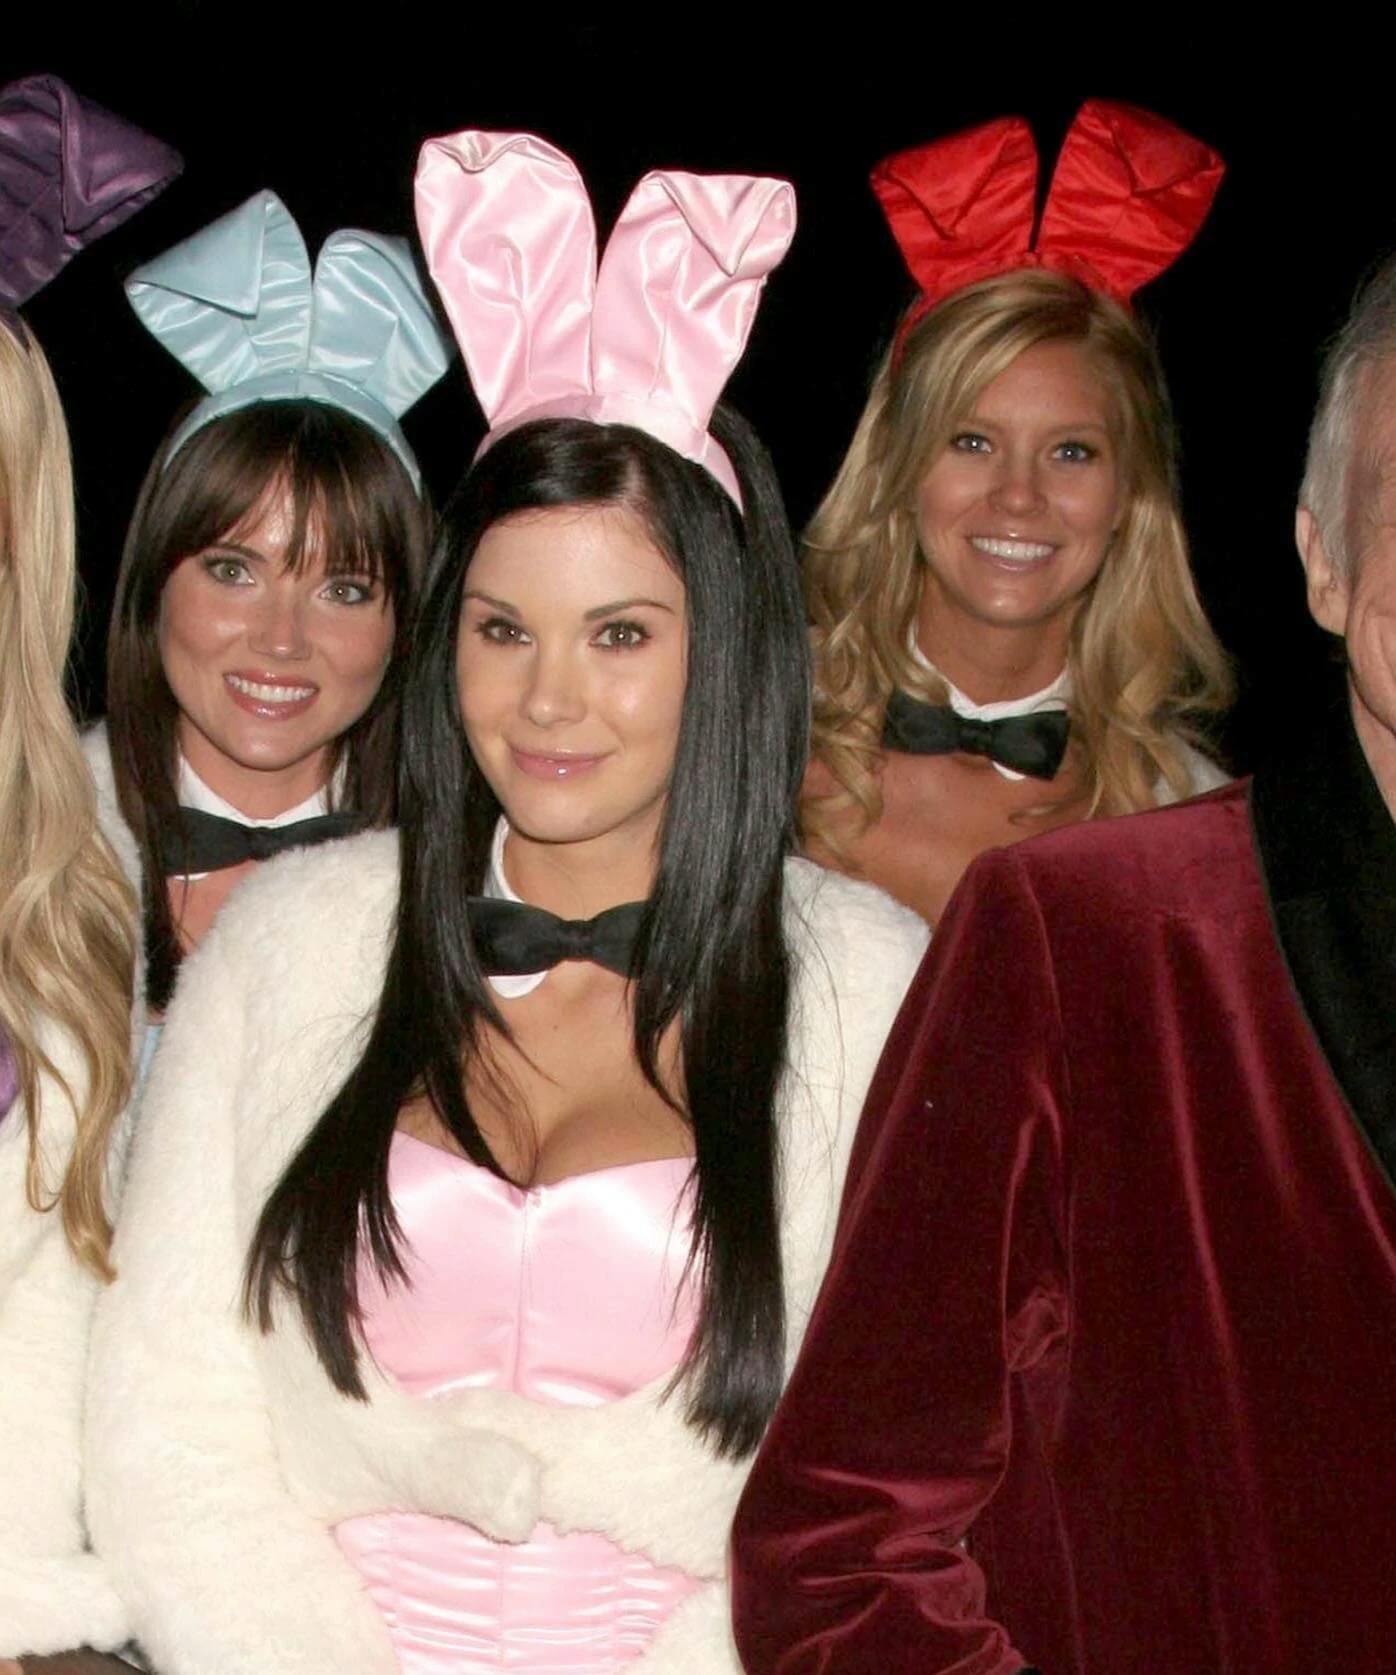 Holly Madison Reveals The Truth Behind The Scenes At The Playboy Mansion